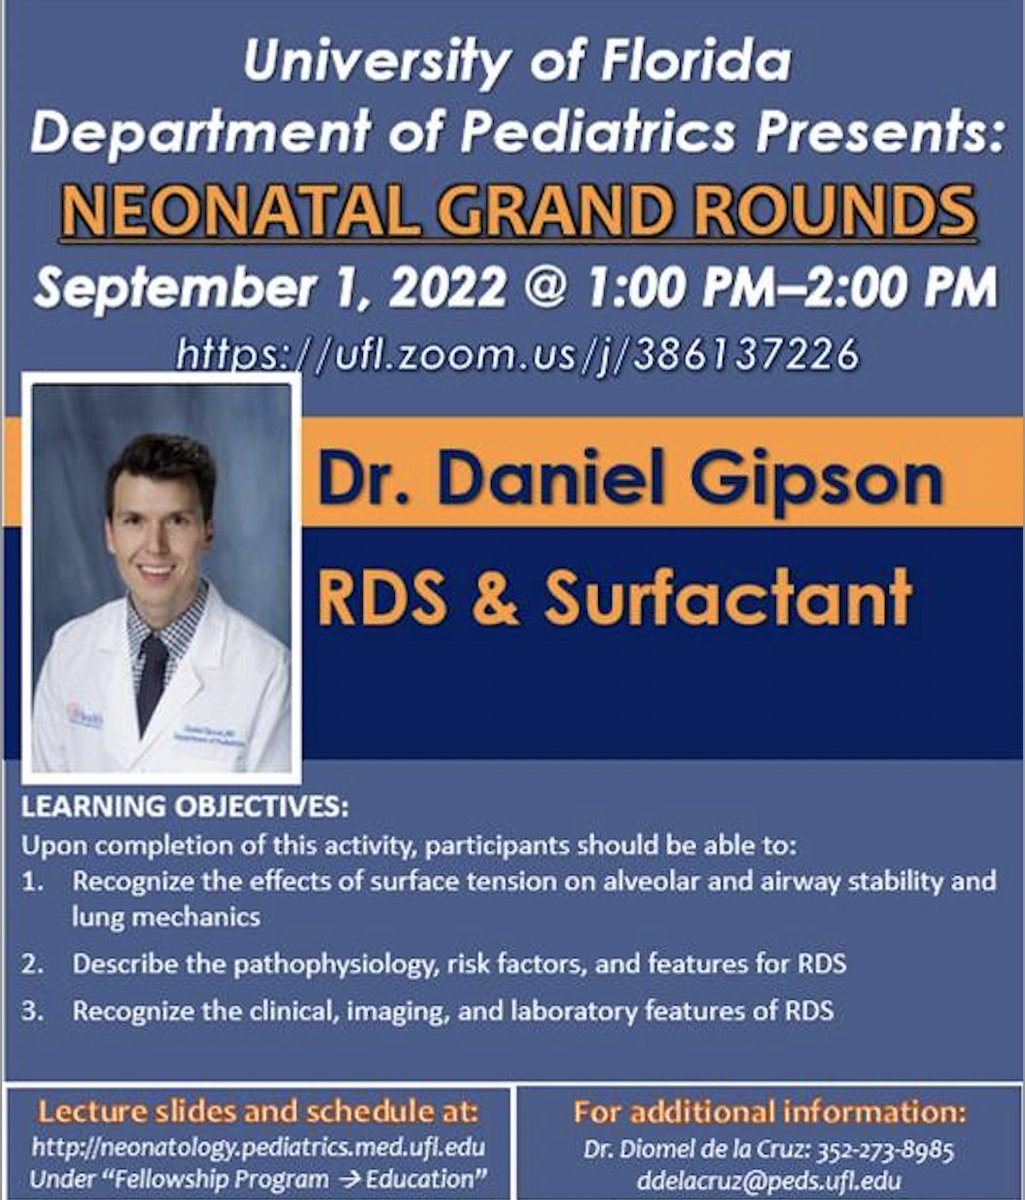 Please join us for UF Neonatal Grand Rounds.

#neotwitter #meded #ufneonatology #ufnicu #nicufellowship